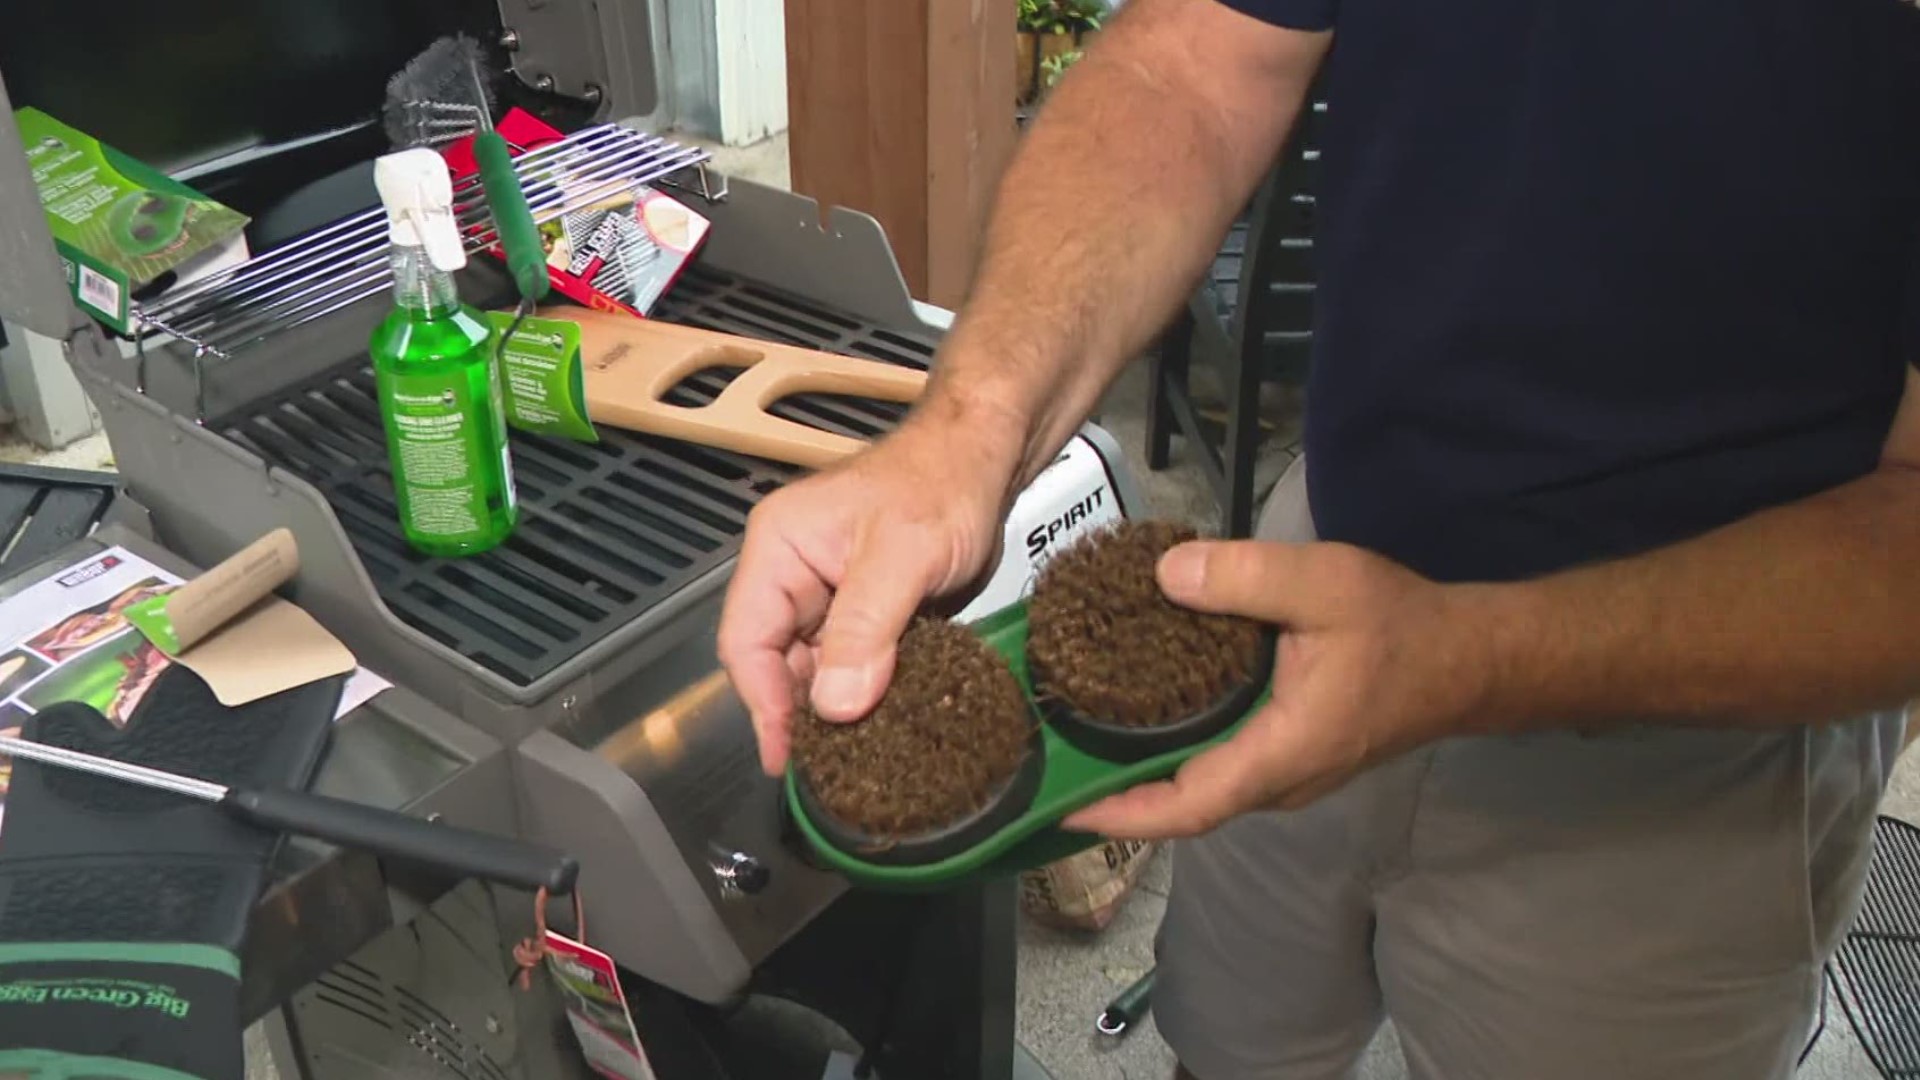 Pat helps get you ready for a safe and successful July 4 cookout.